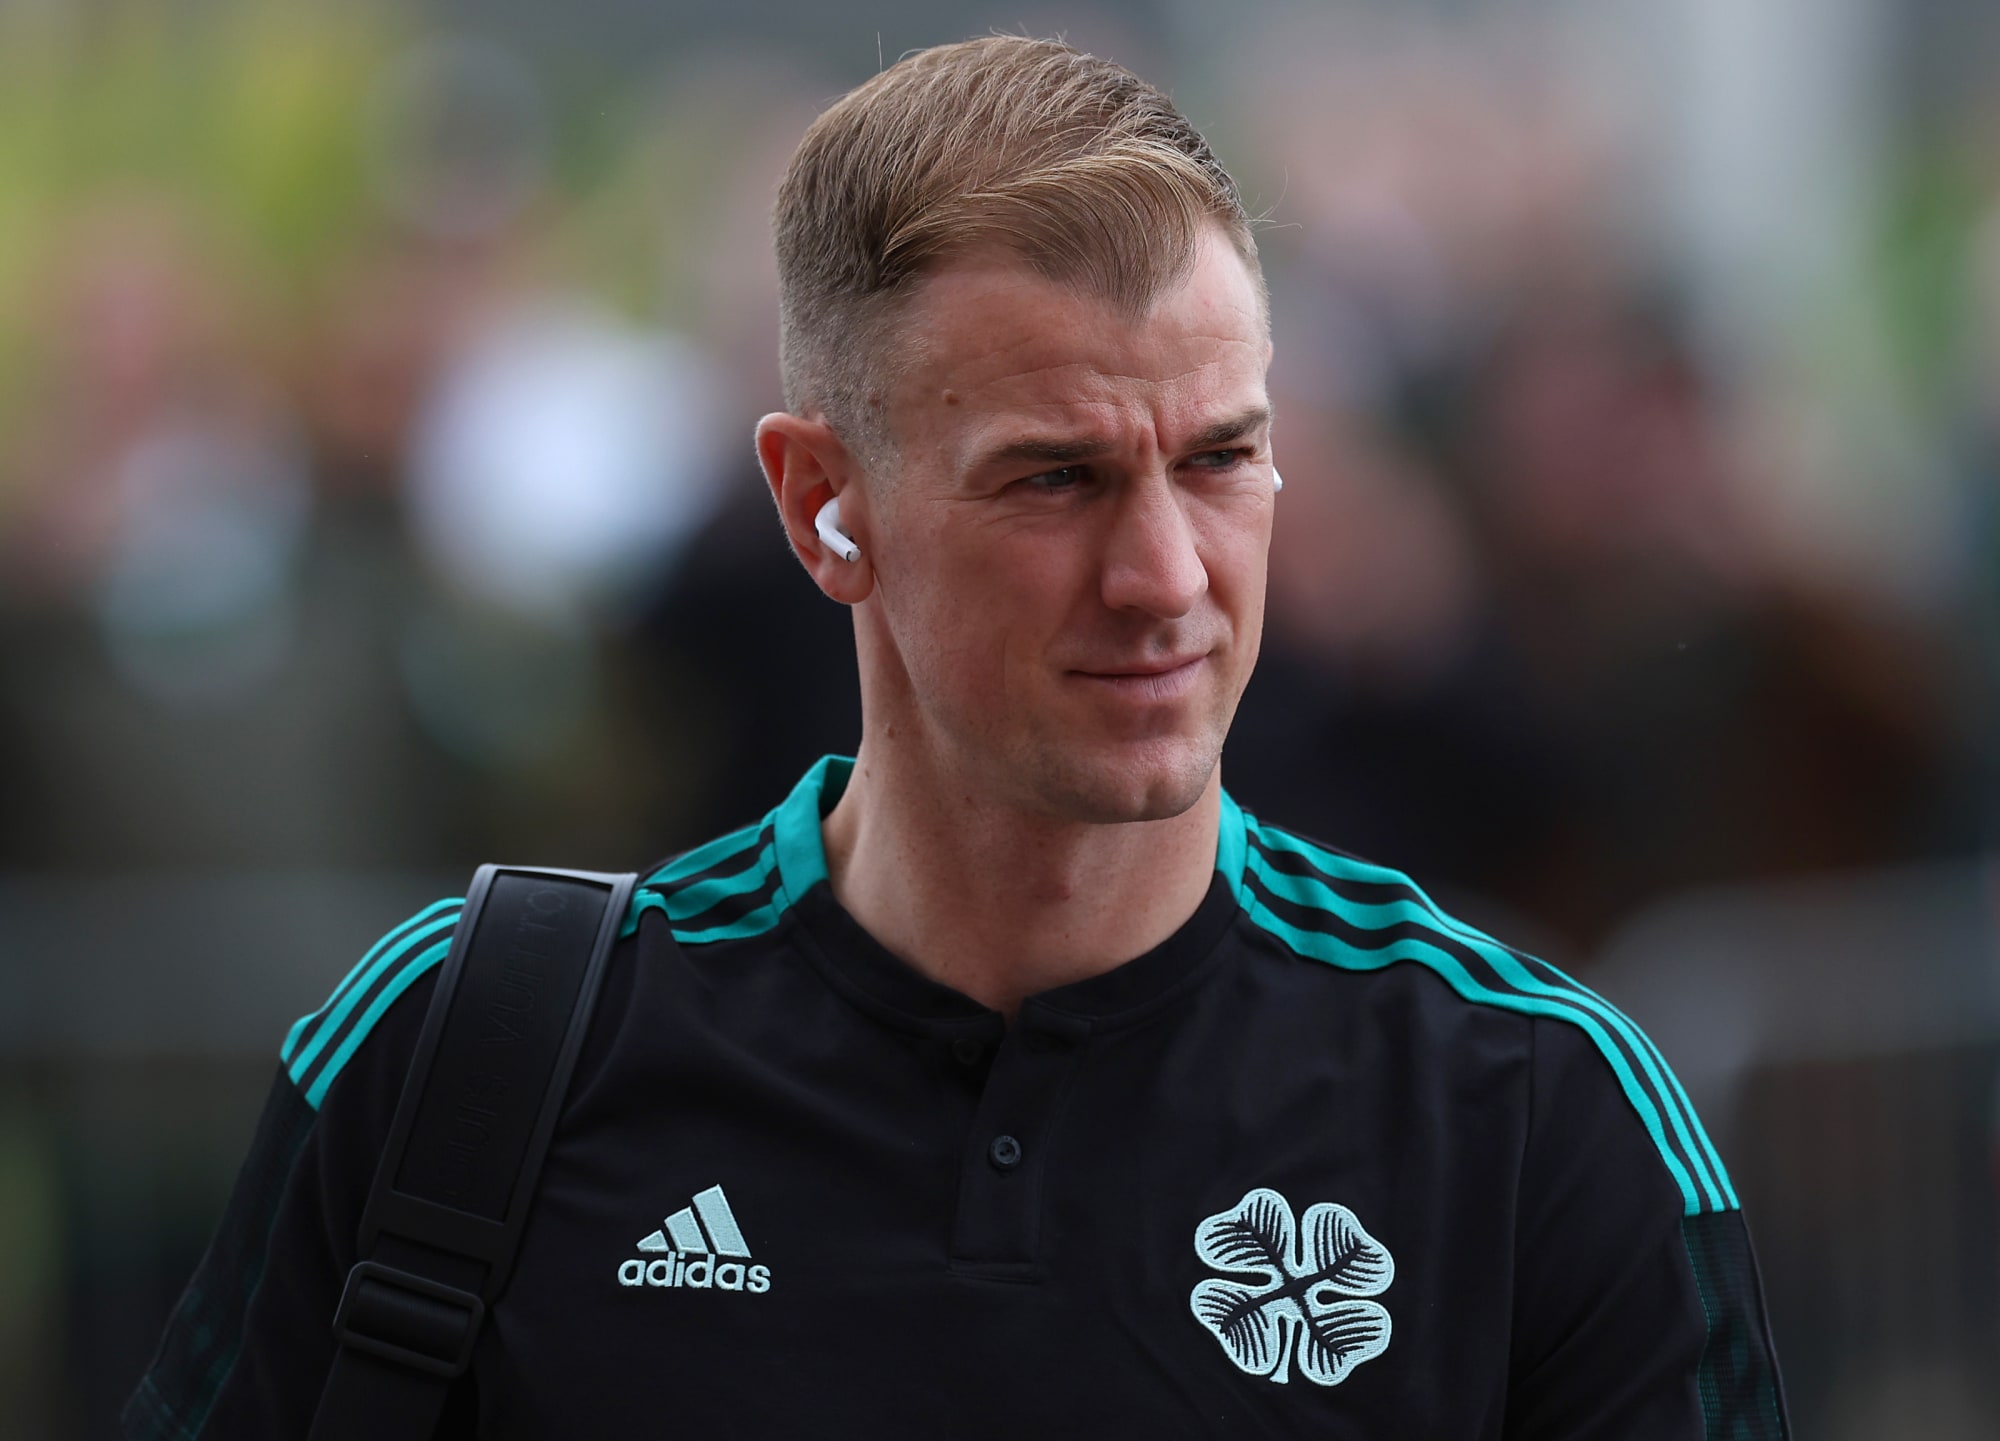 He is top' – Former Man City keeper Joe Hart says Celtic boss Ange  Postecoglou is his greatest manager